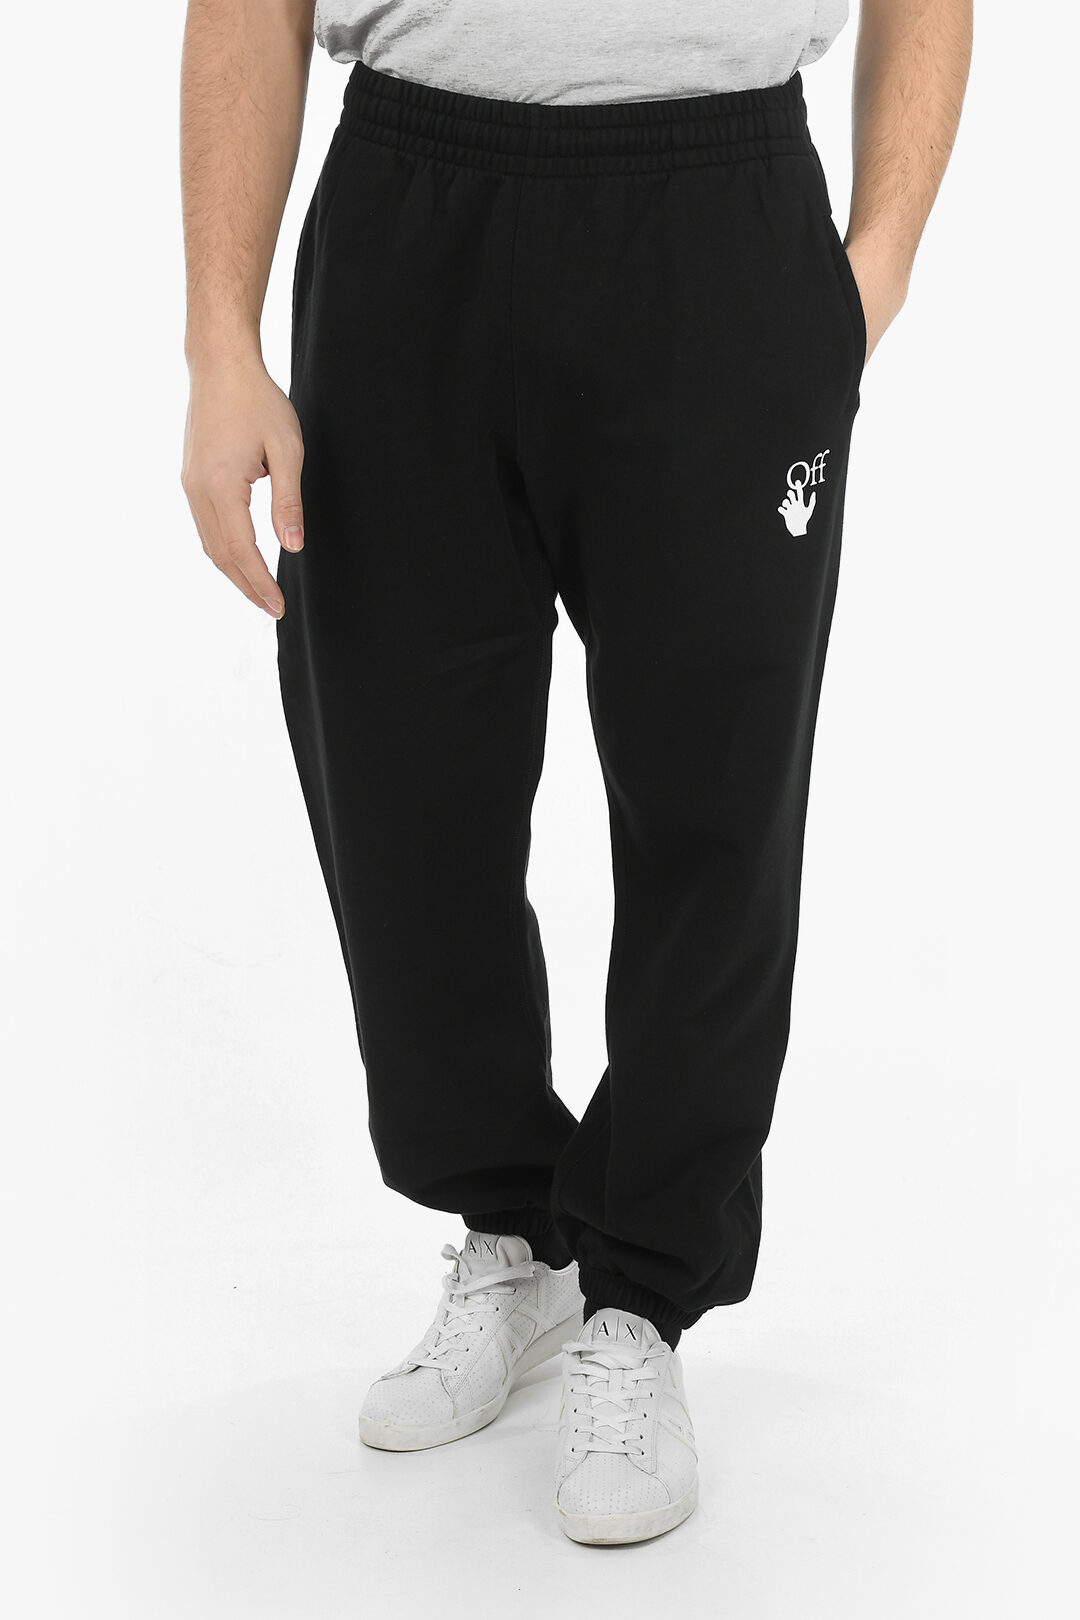 Off-White MARKER Cotton Joggers - Glamood Outlet